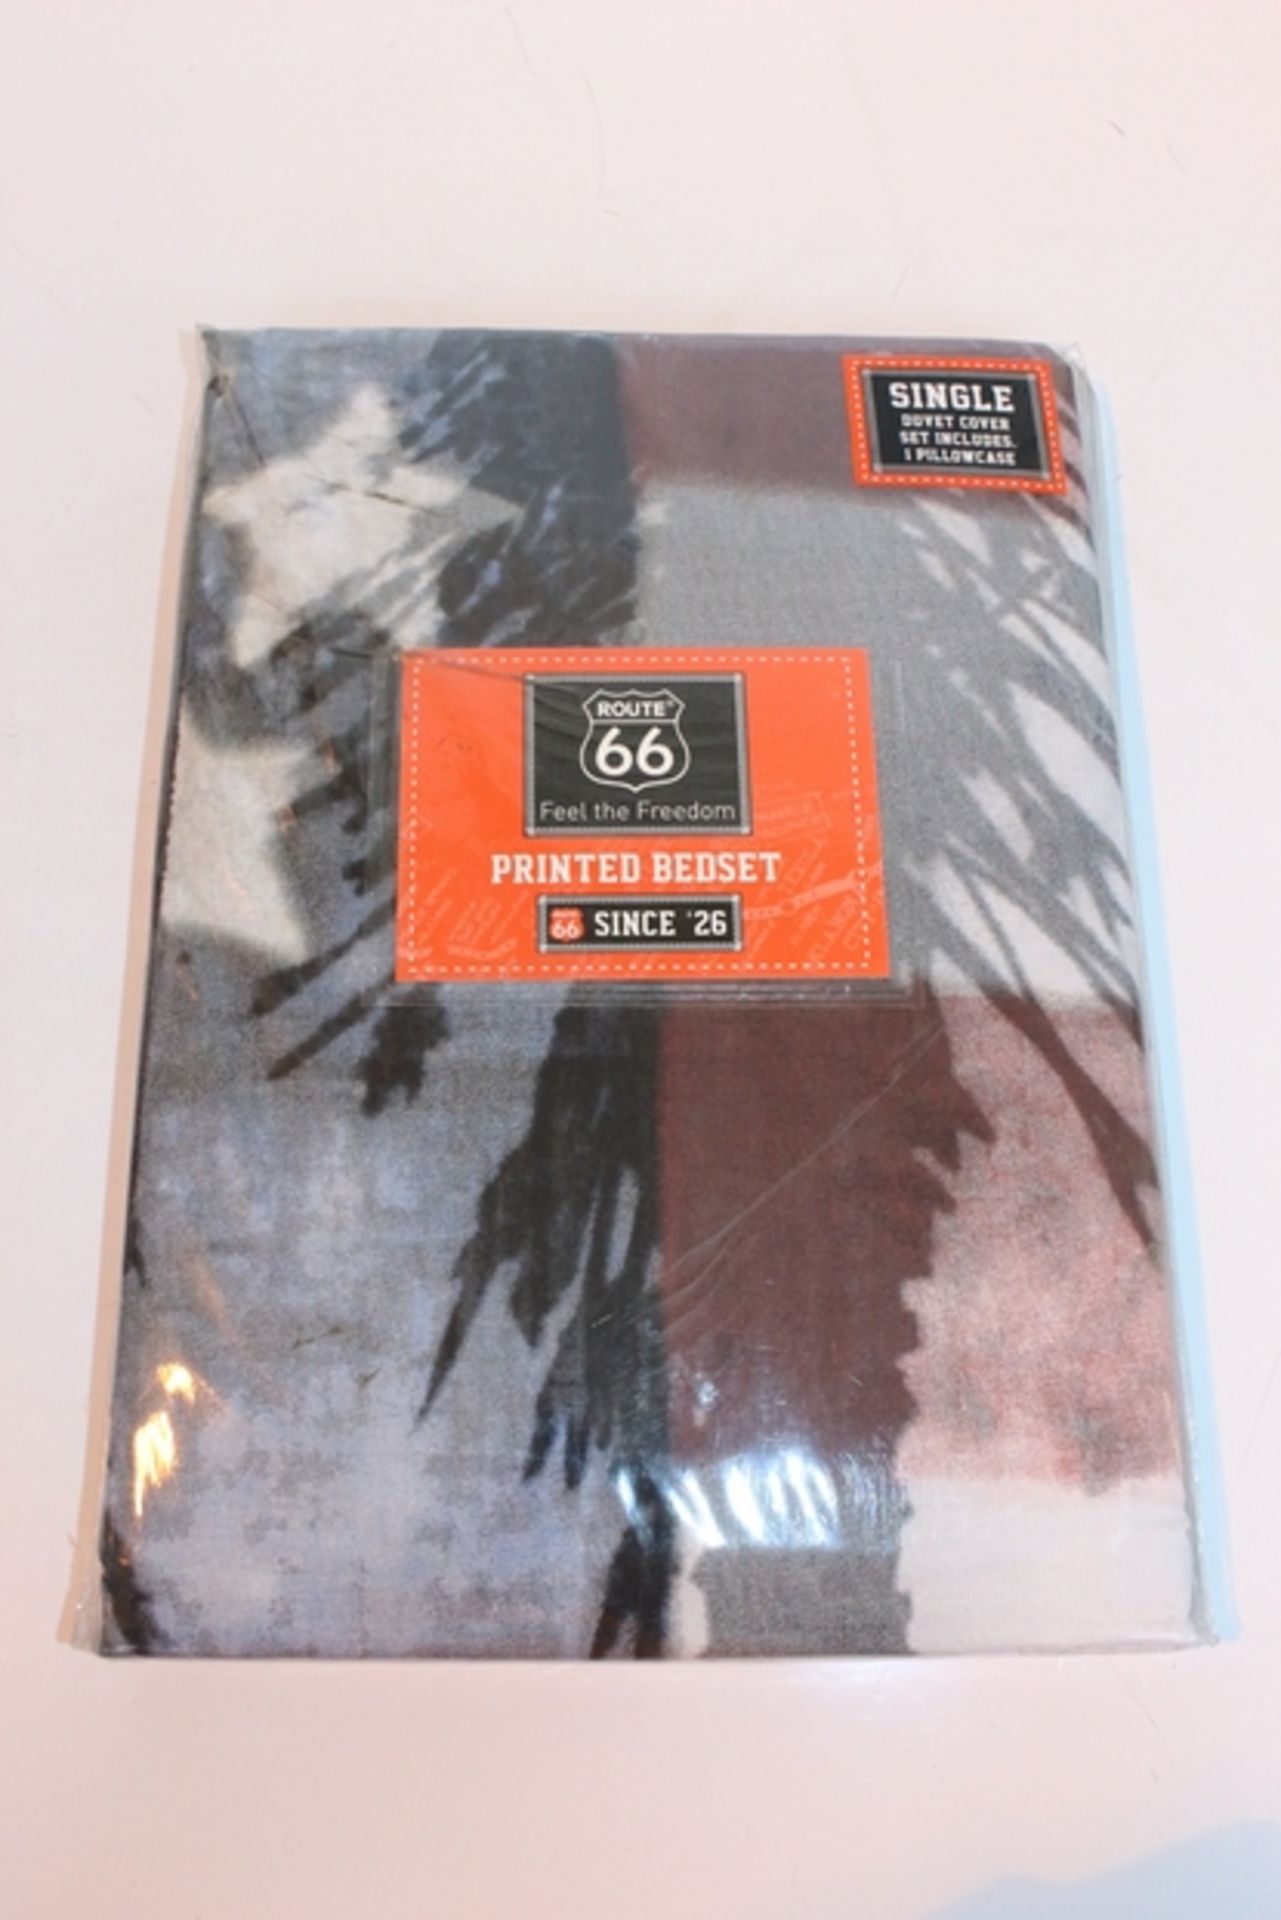 5 x BAGGED BRAND NEW ROUTE 66 SINGLE DUVET COVER SET INCLUDES 1 PILLOW CASE (26.05.17) *PLEASE